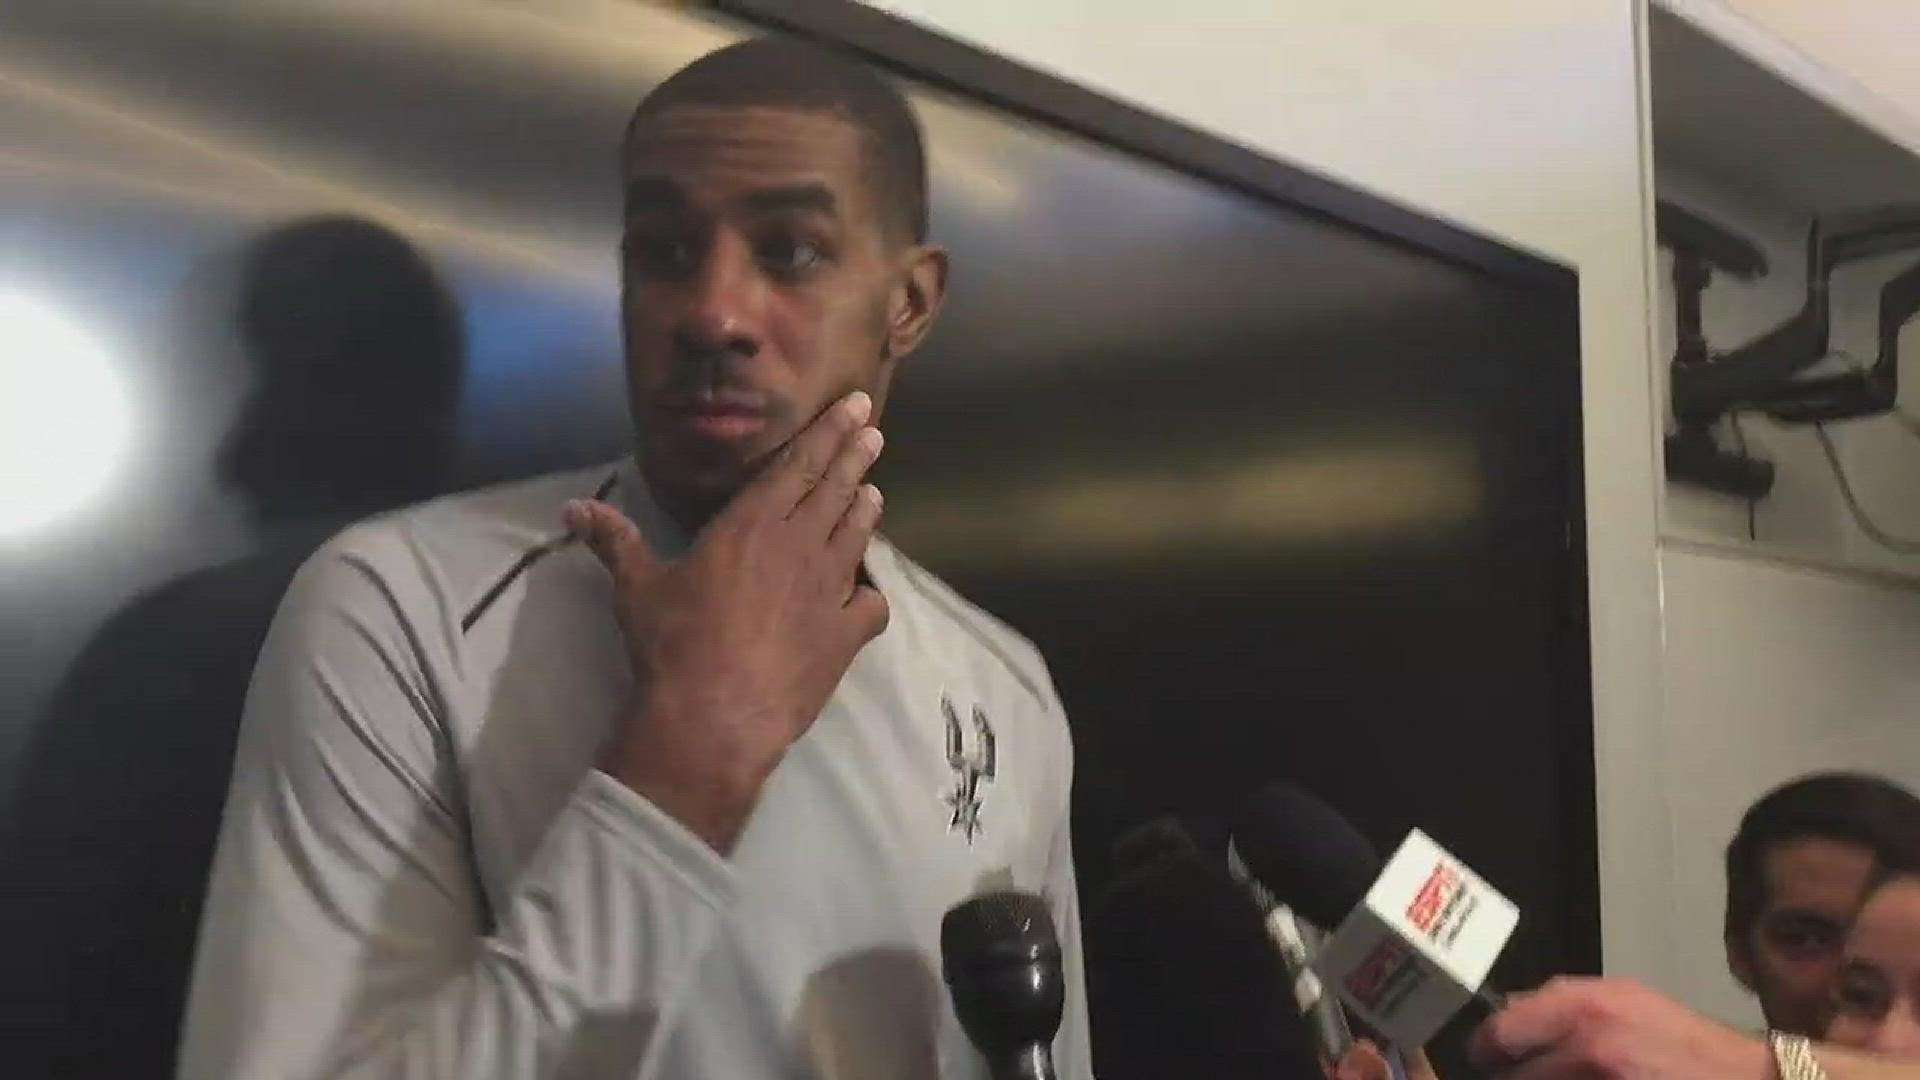 Spurs forward LaMarcus Aldridge on the win over the Nuggets